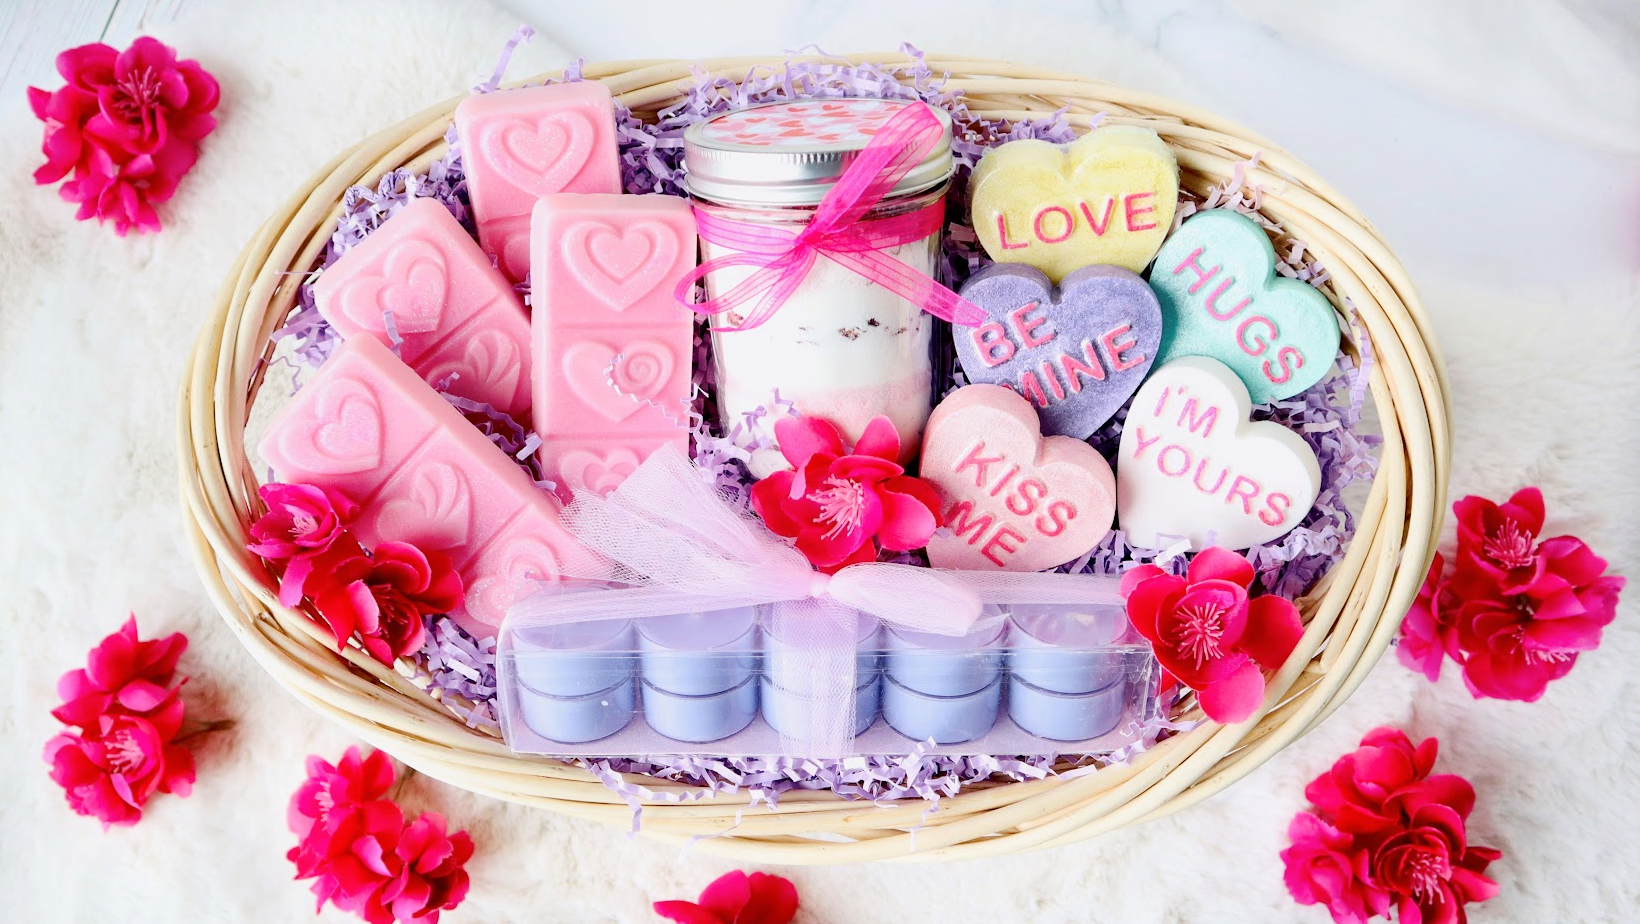 How to Make the Ultimate DIY Valentine's Day Gift Basket – NorthWood  Distributing